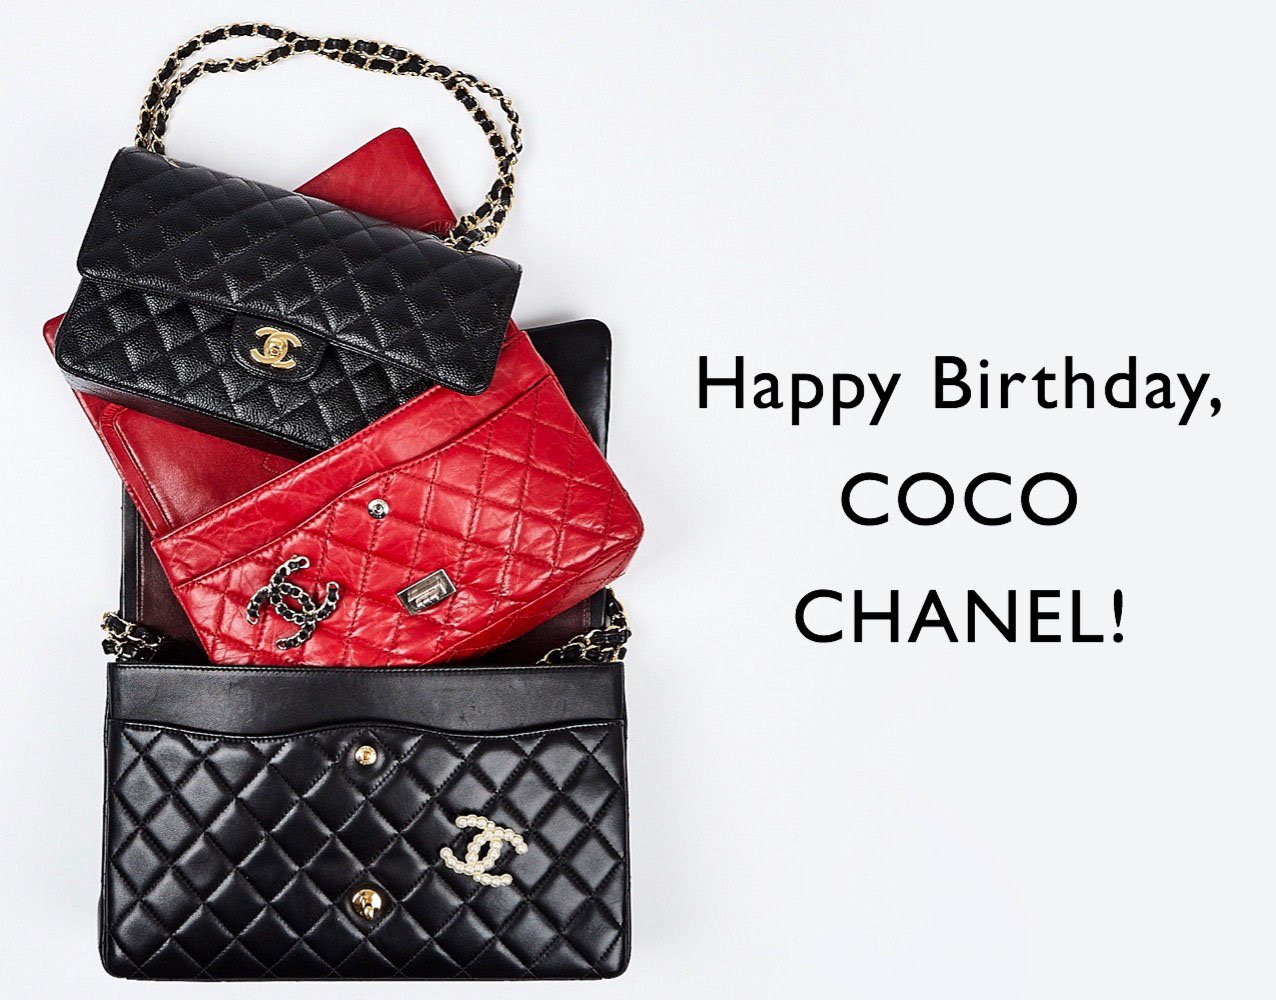 Yoogi's Closet - What is your favorite Chanel bag of all time?